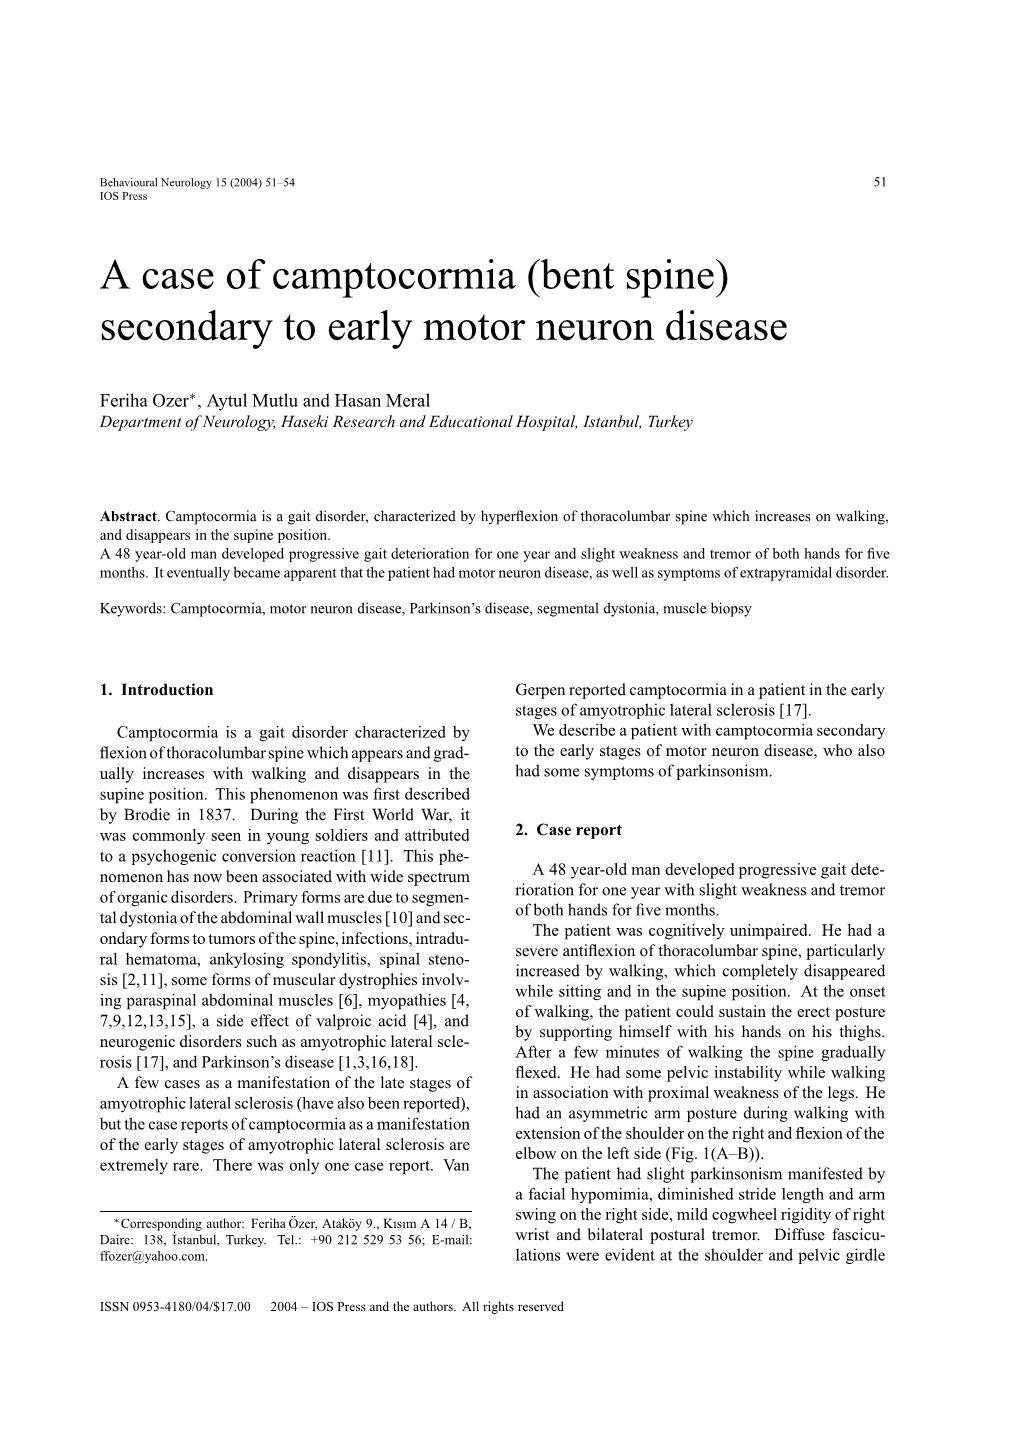 A Case of Camptocormia (Bent Spine) Secondary to Early Motor Neuron Disease